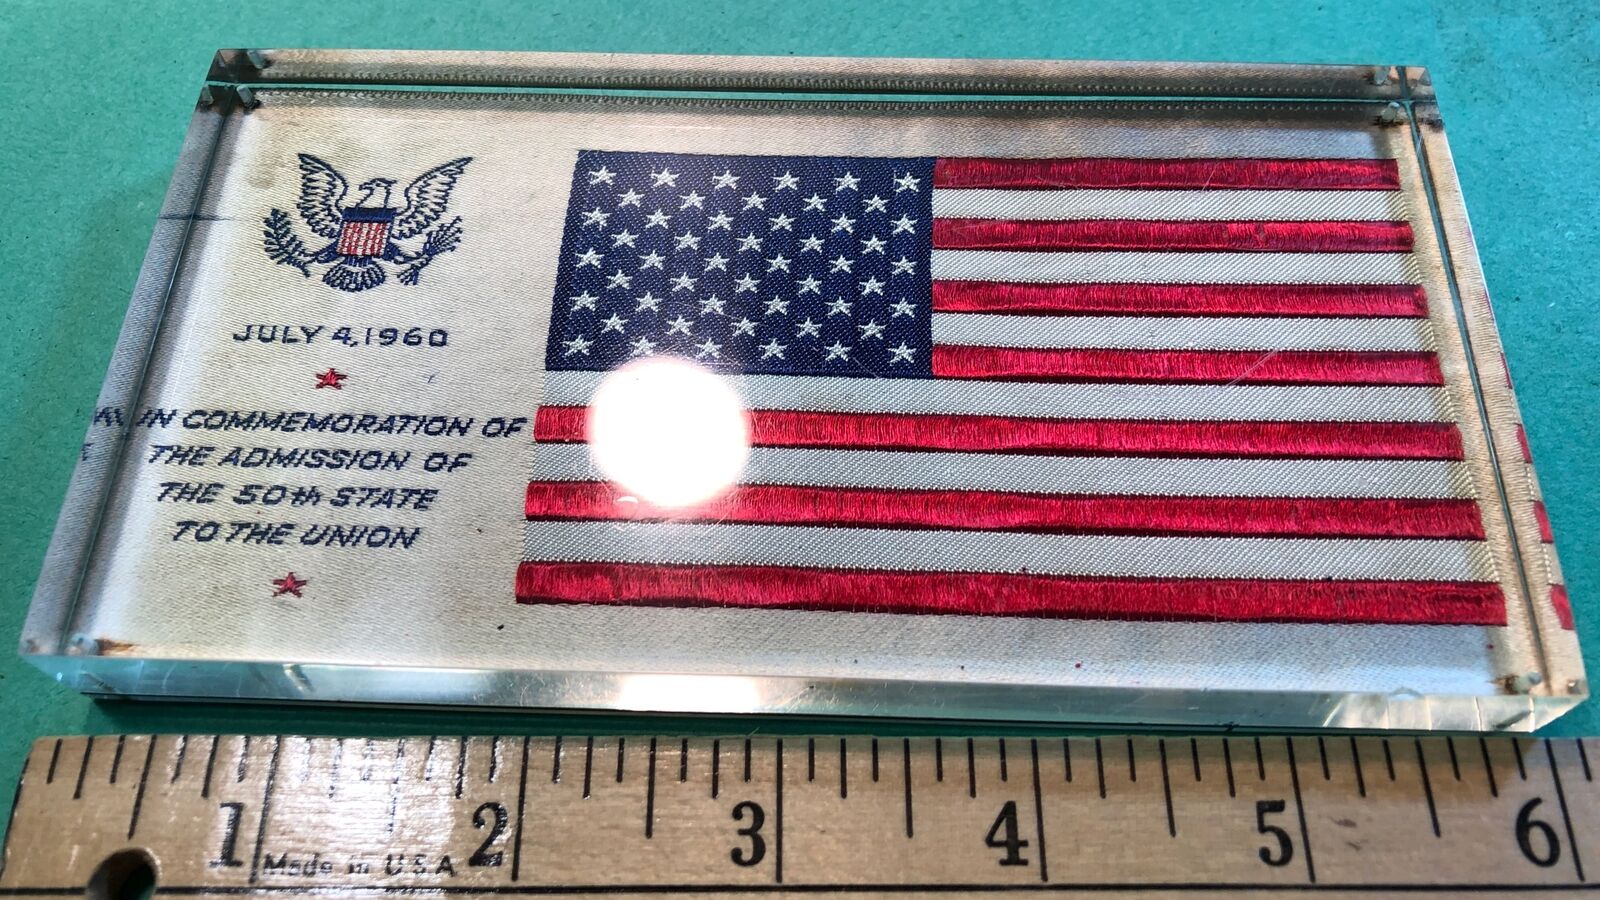 July 4th 1960 Artex Woven Label Paperweight 50 Star Flag Hawaii 50th State VTG